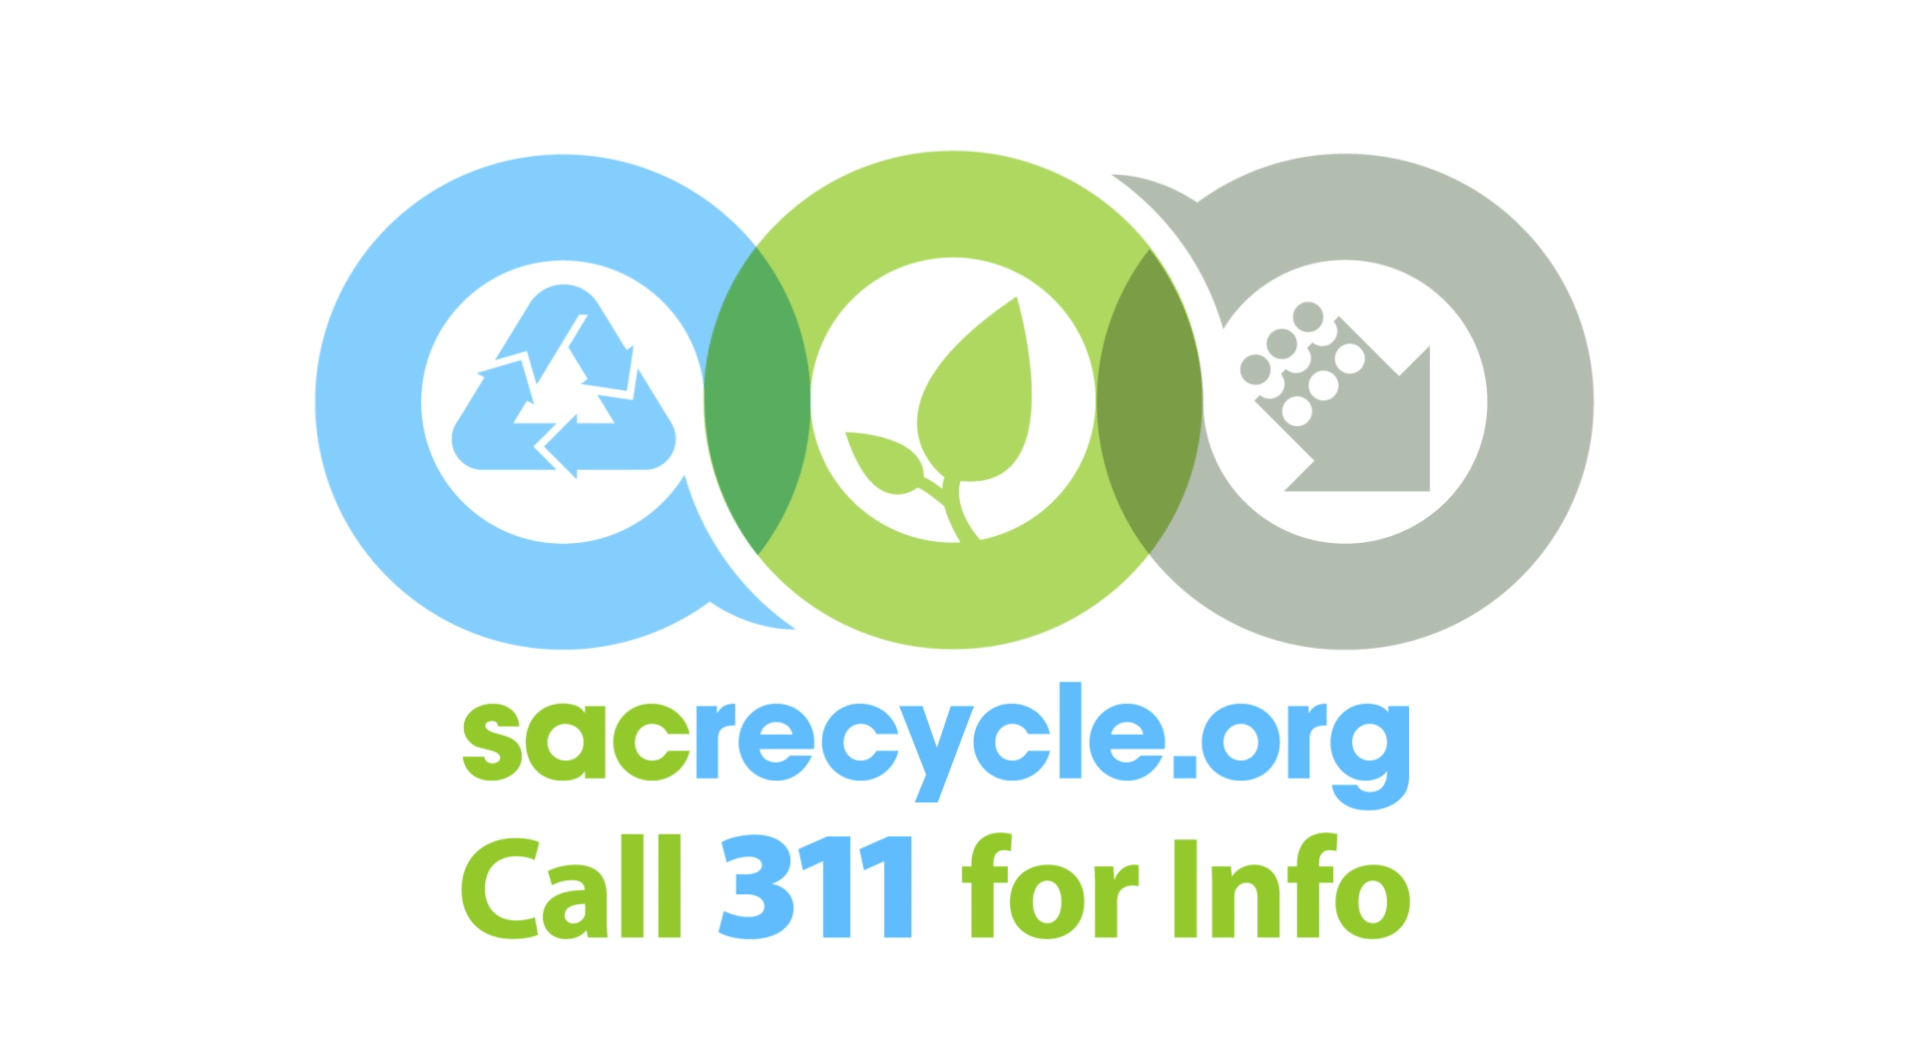 Sacrecylce.org Call 311 For Info Graphic With Recycle Leaf And Array On Top As Our Favorite Projects From 2014